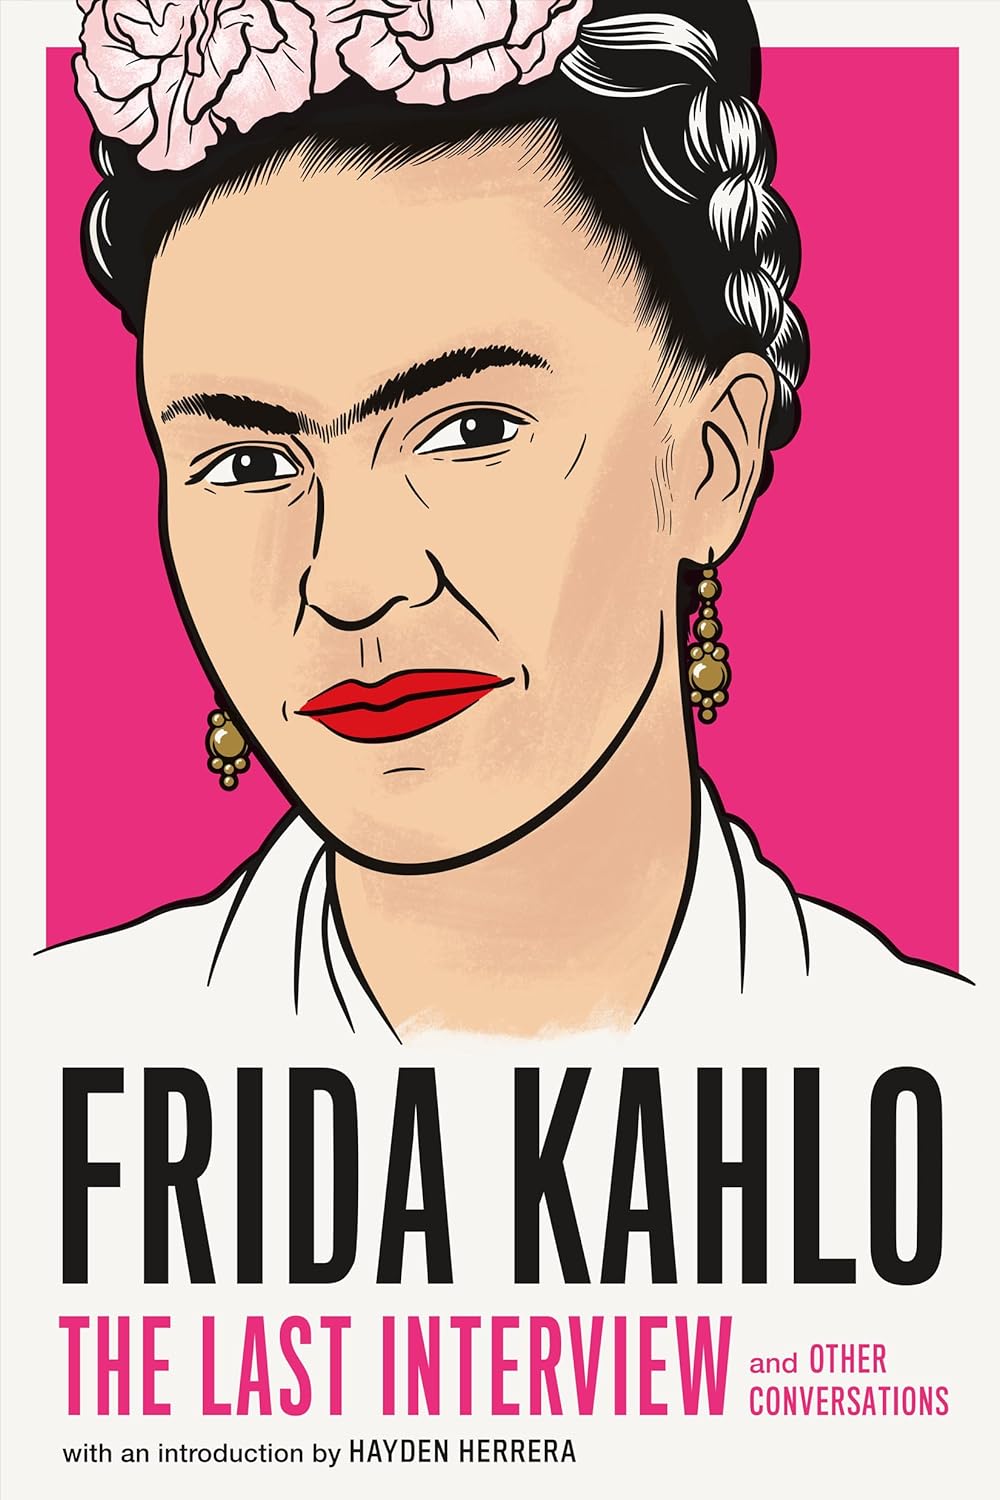 Frida Kahlo: The Last Interview: and Other Conversations by Hayden Herrera